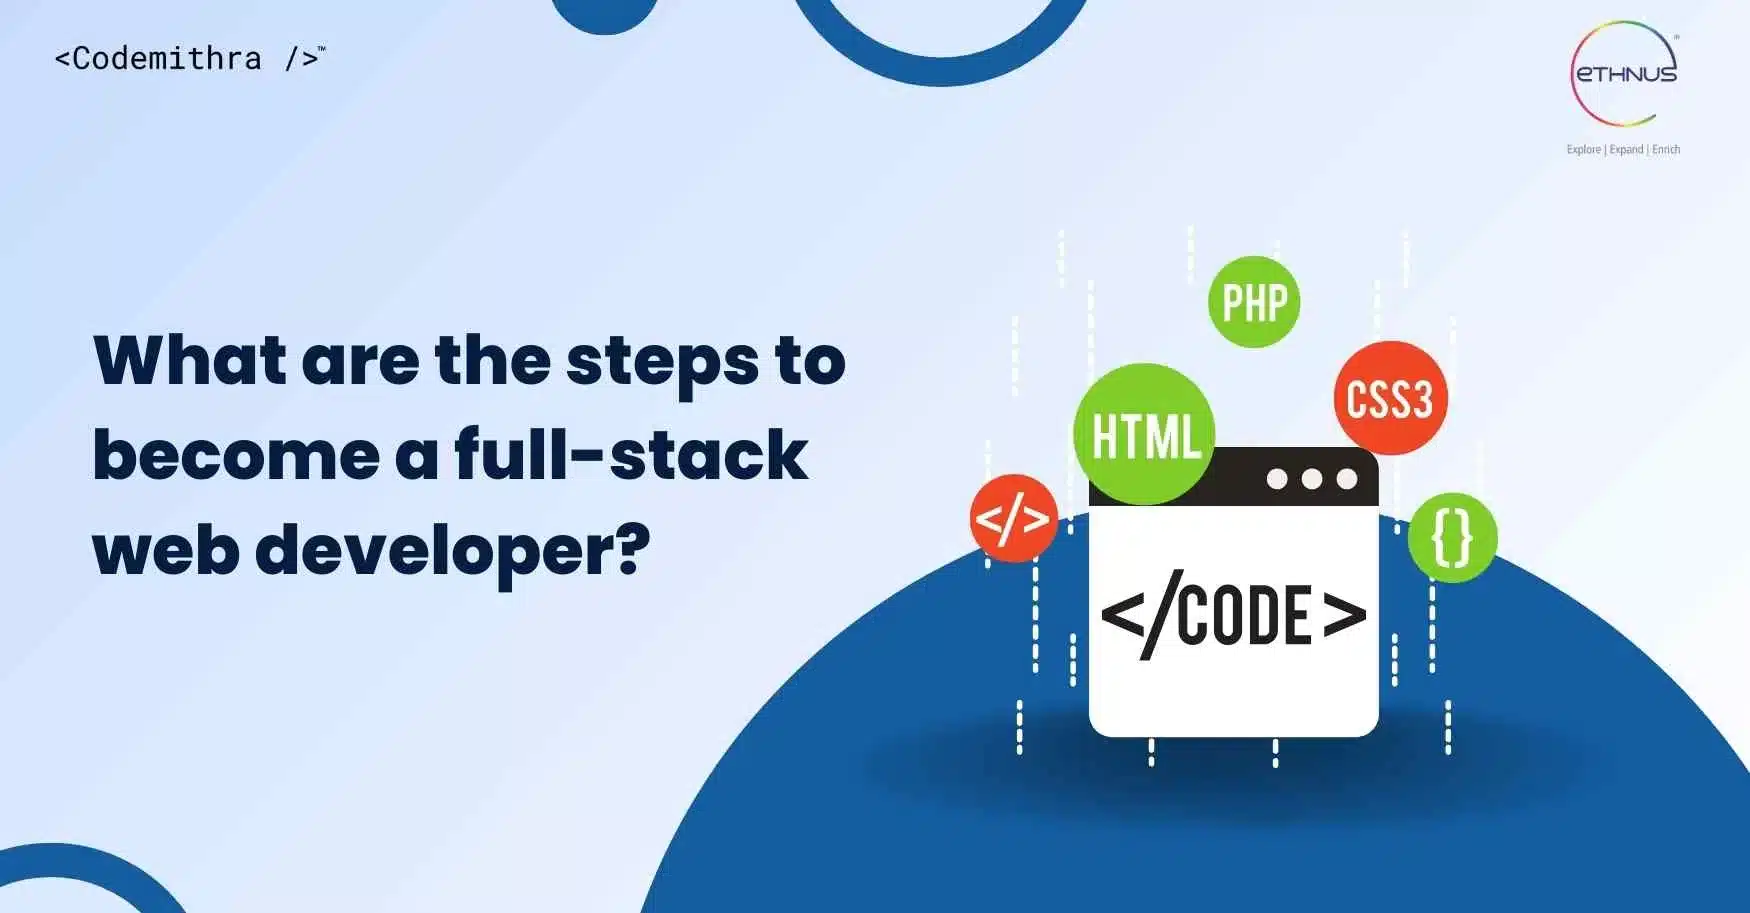 What are the steps to become a full-stack web developer?